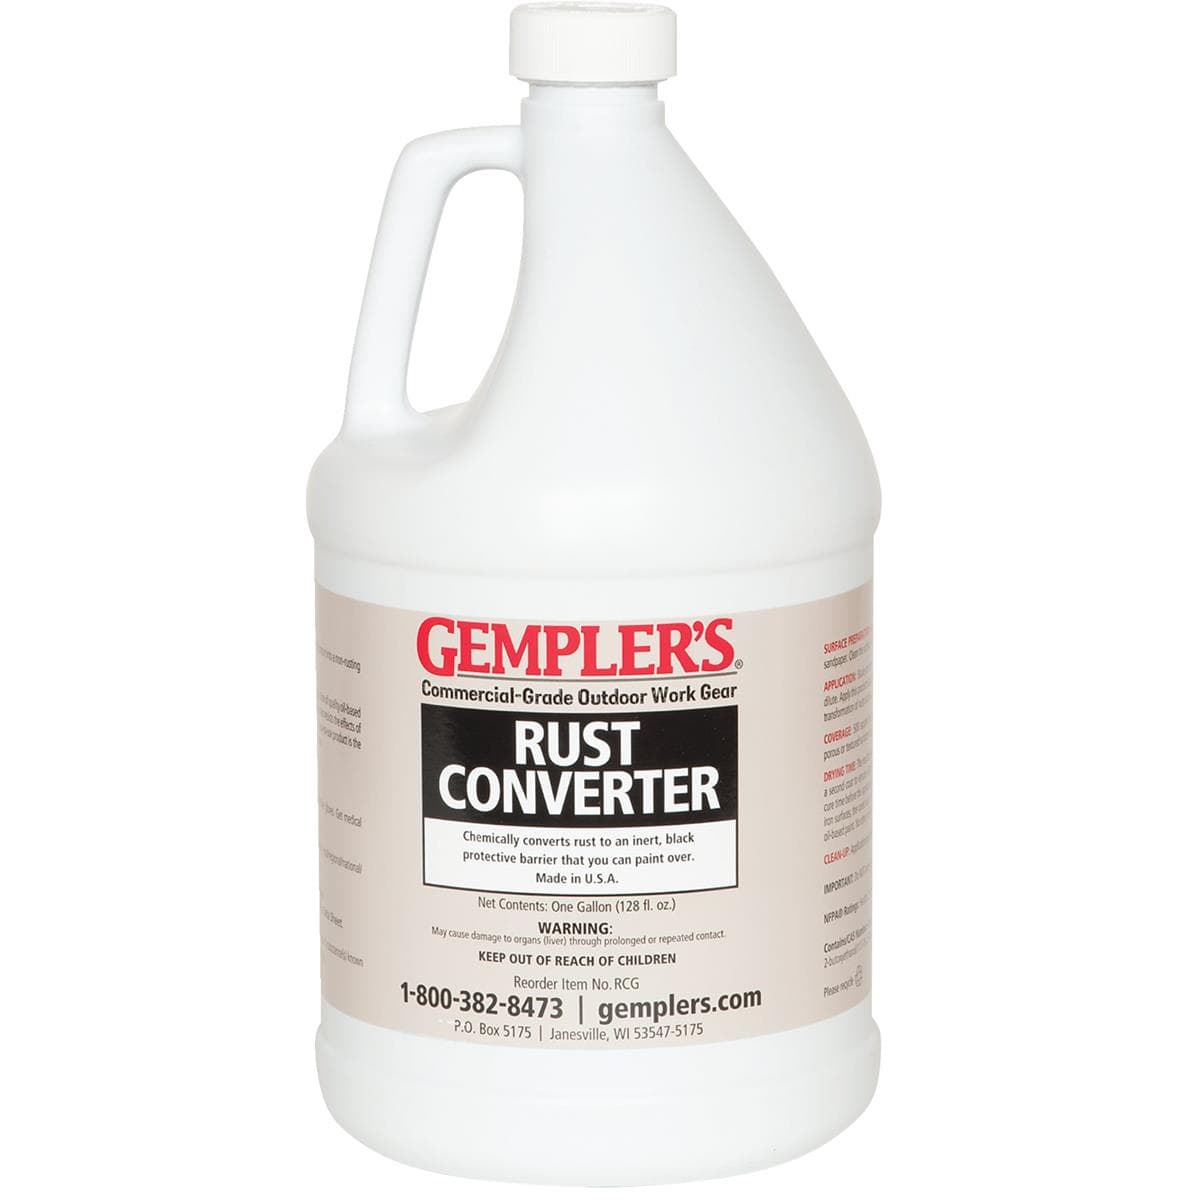 Gemplers Rust Converter Kit with Large Gloves